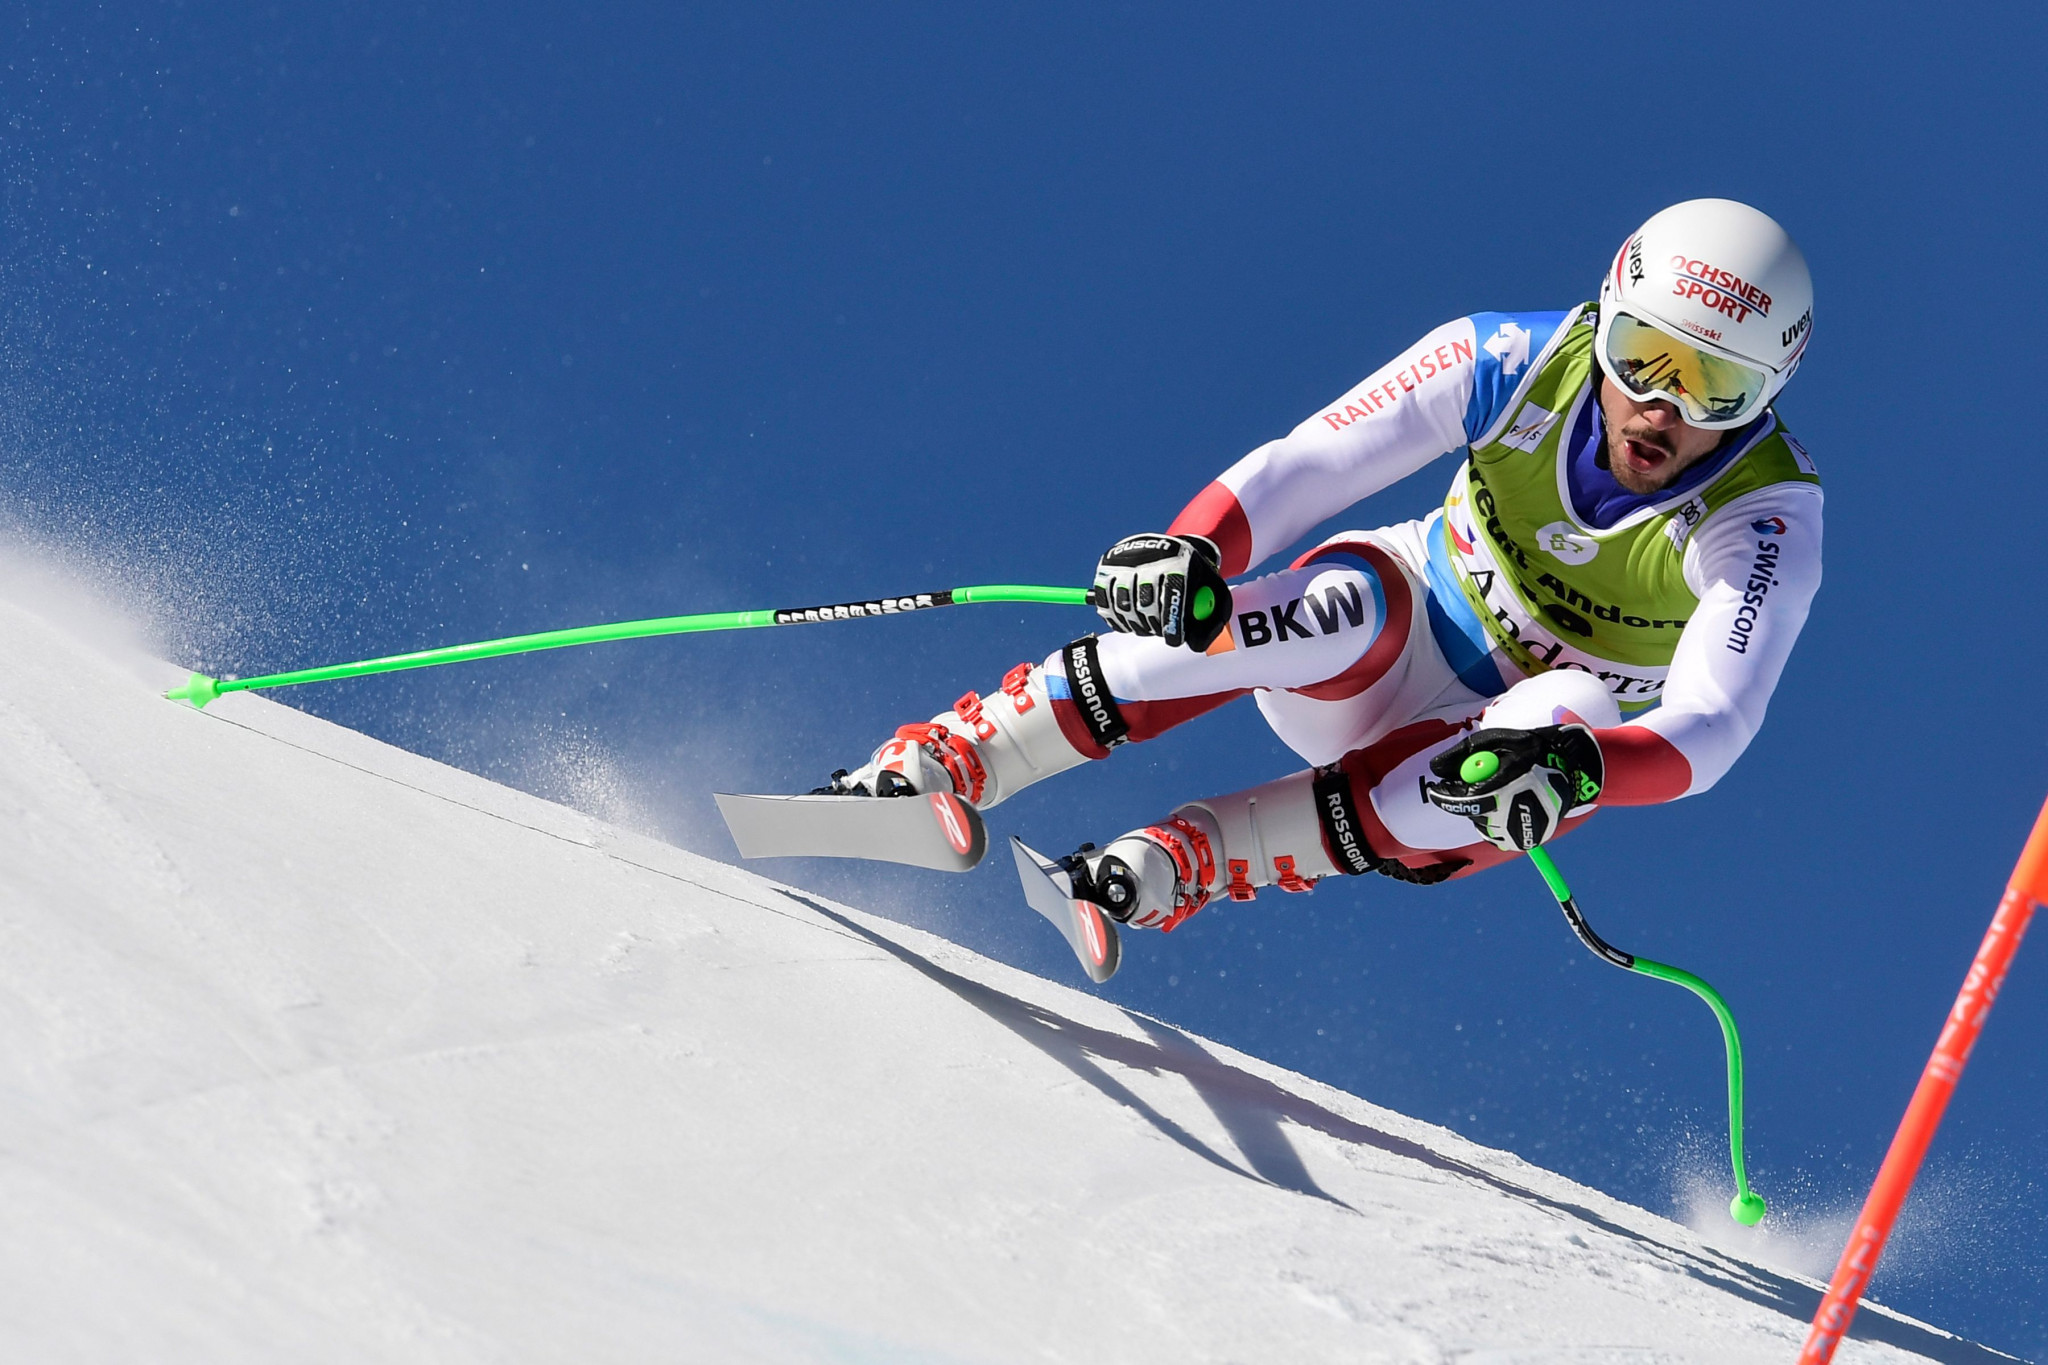 Carlo Janka was the fastest competitor in training for the downhill competition at Lake Louise ©Getty Images